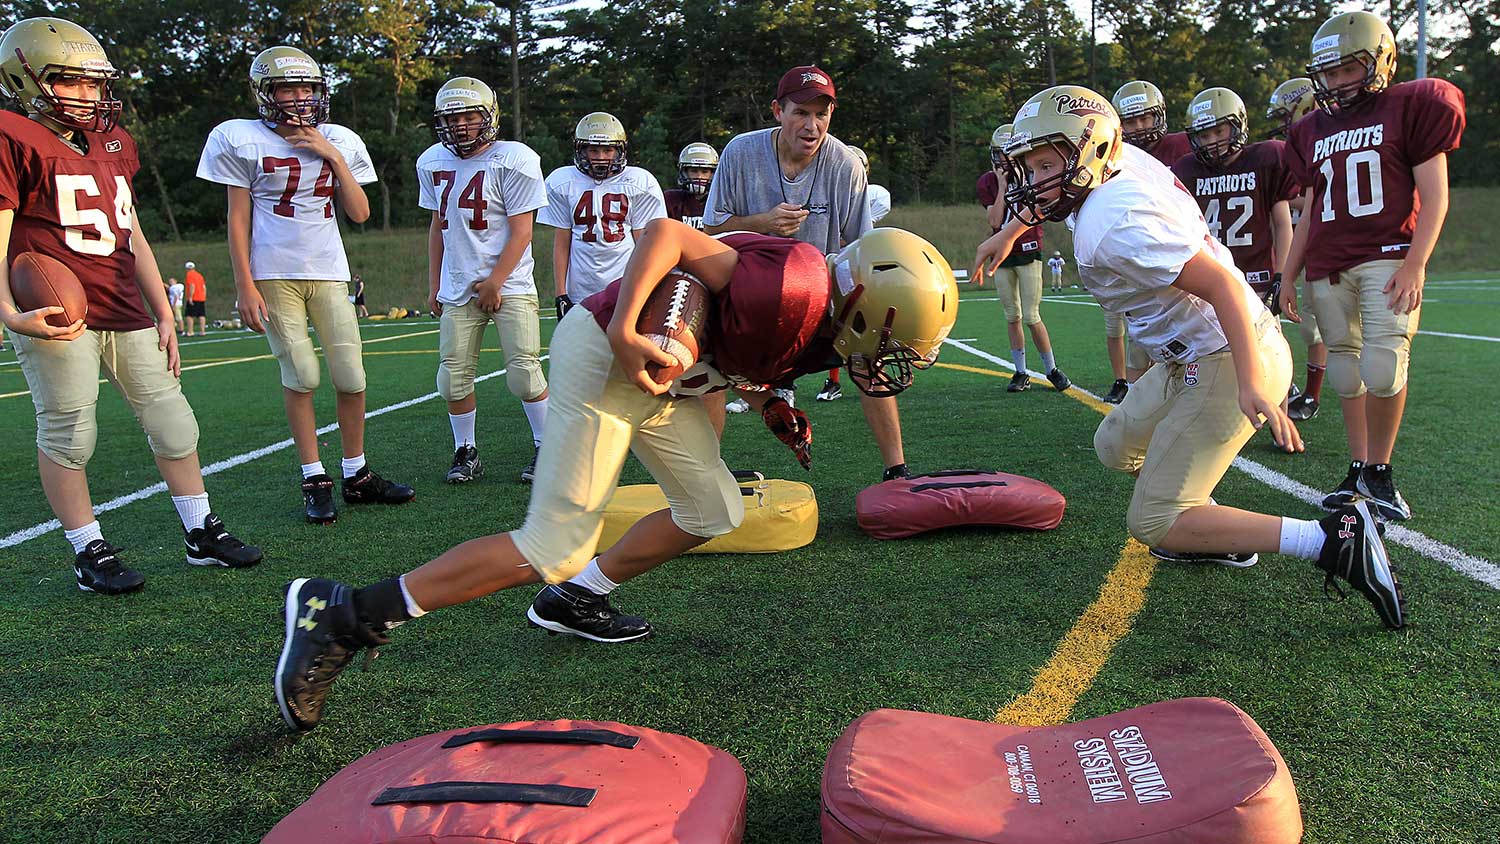 CONCORD, MA - AUGUST 16: Kevin Smith, President of Concord-Carlisle Pop Warner Football, center, coaches a one-on-one drill during practice.
